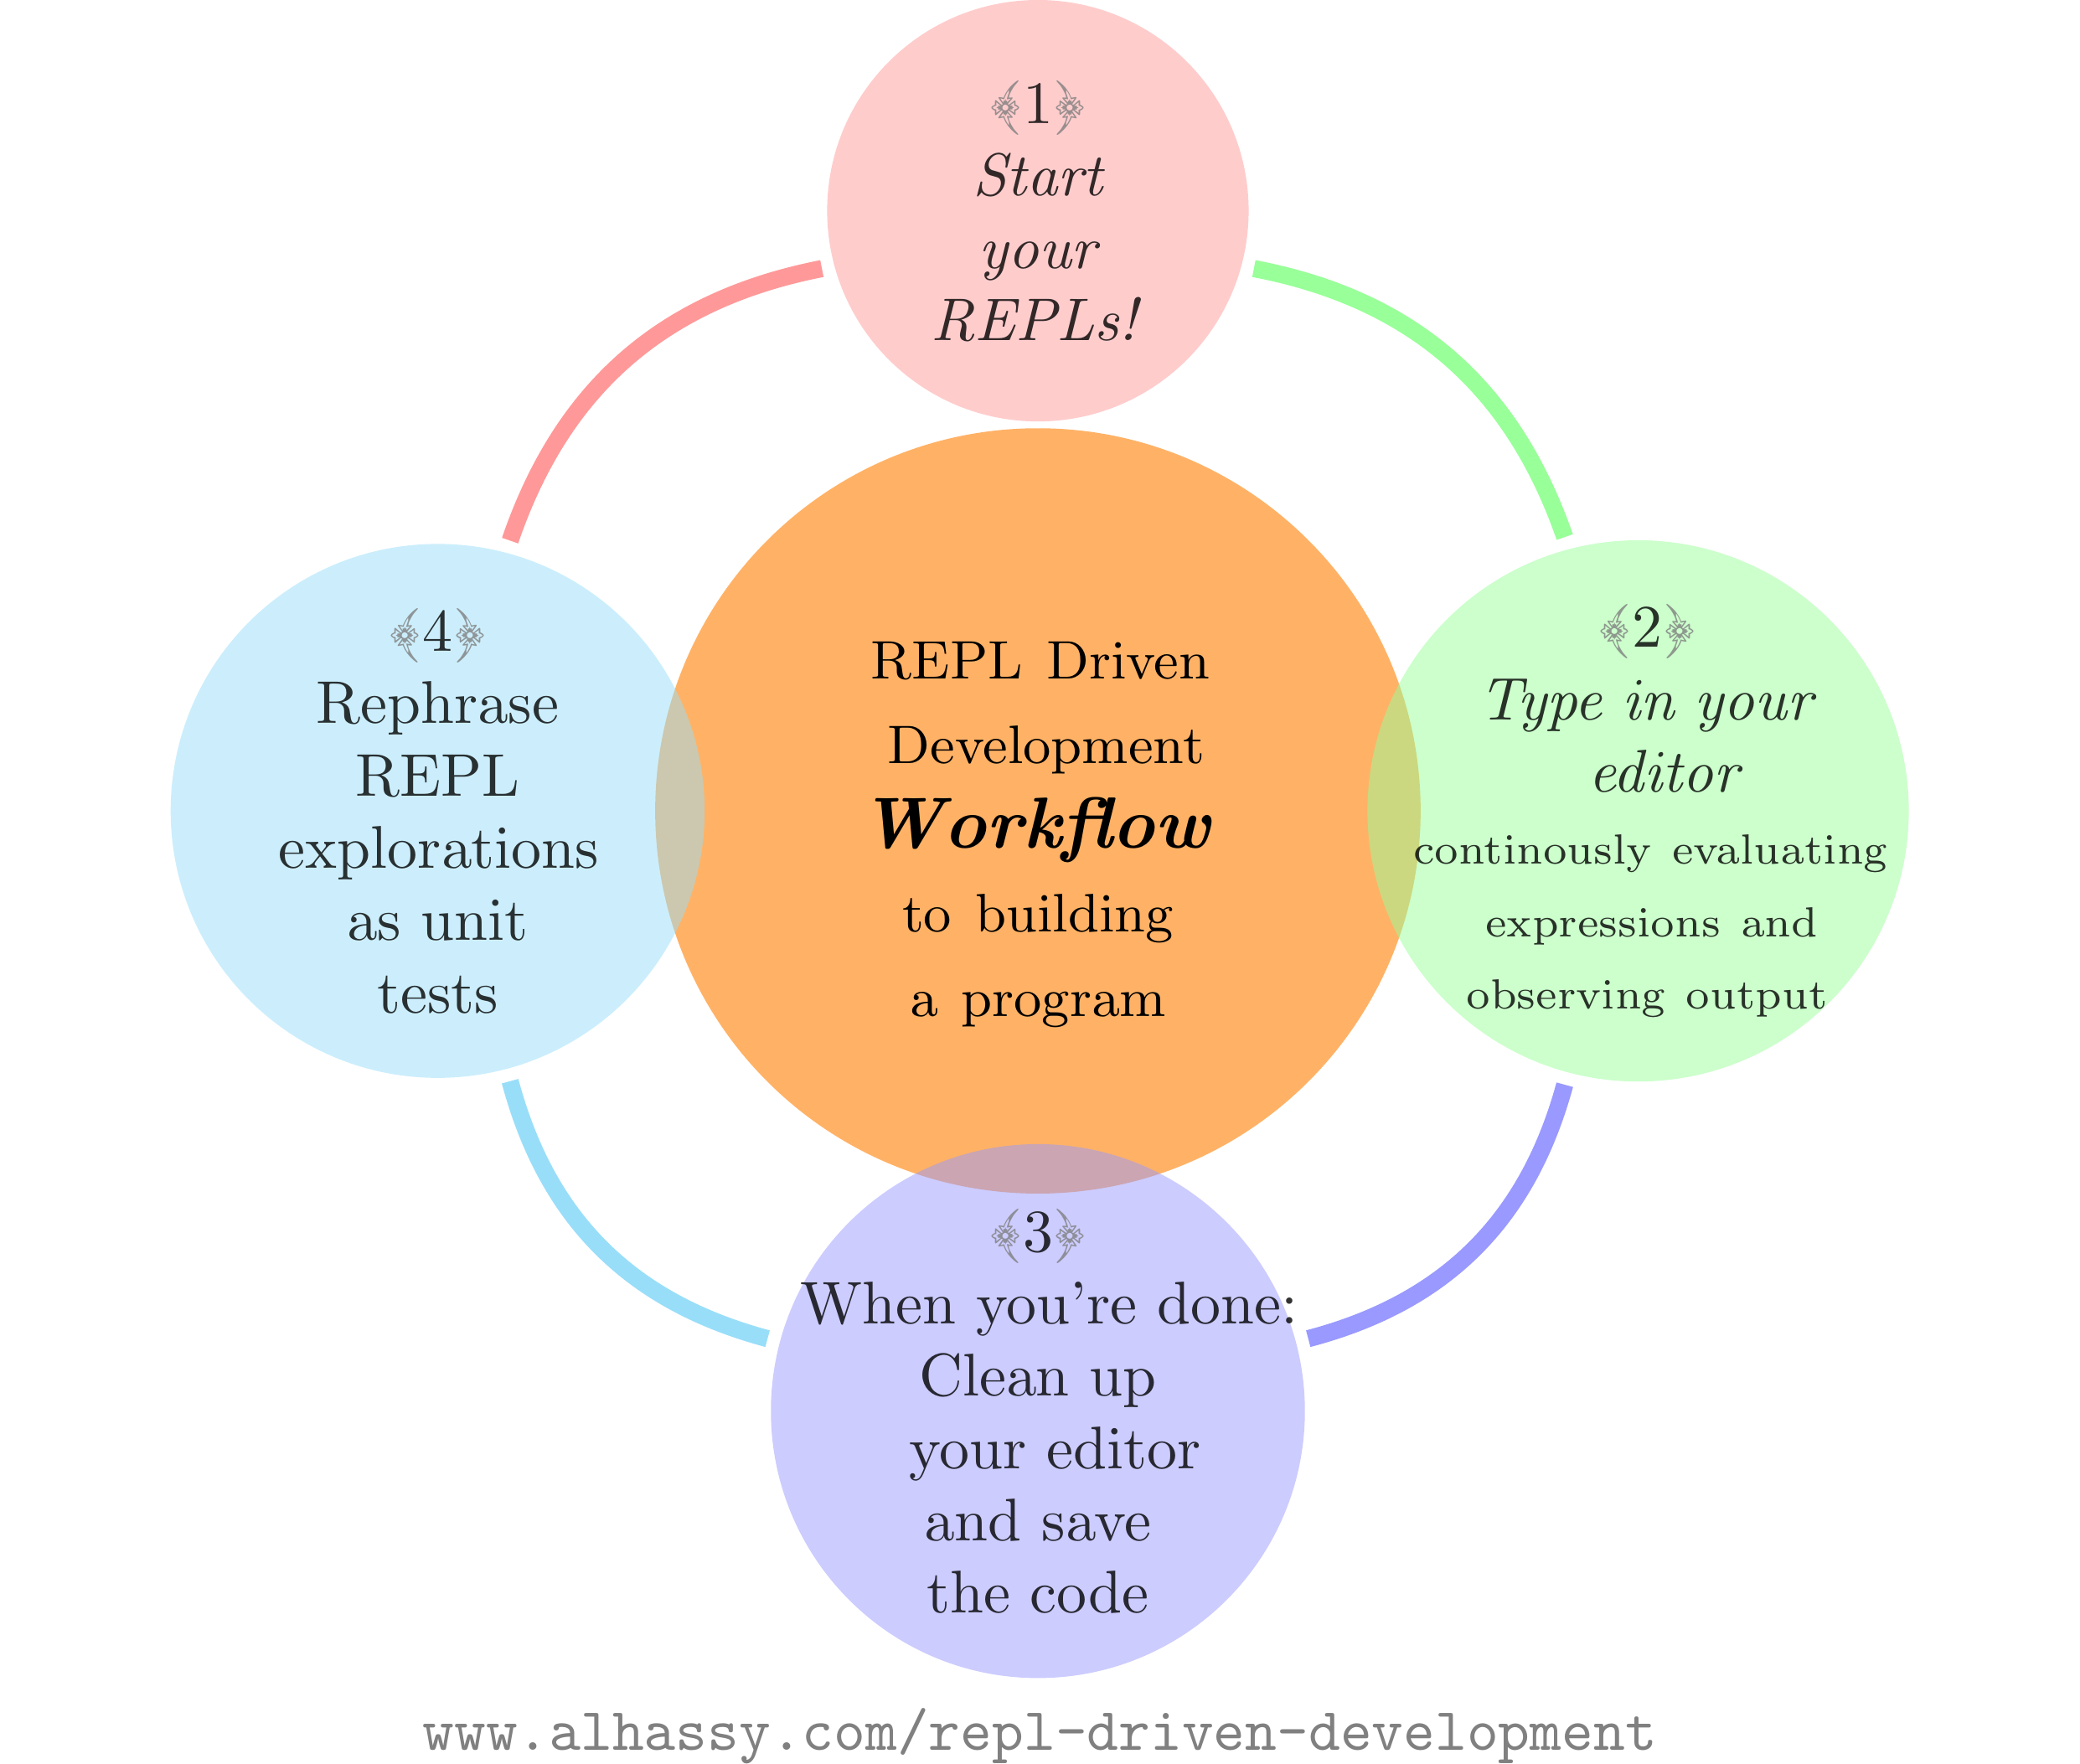 file:../images/rdd-workflow.png